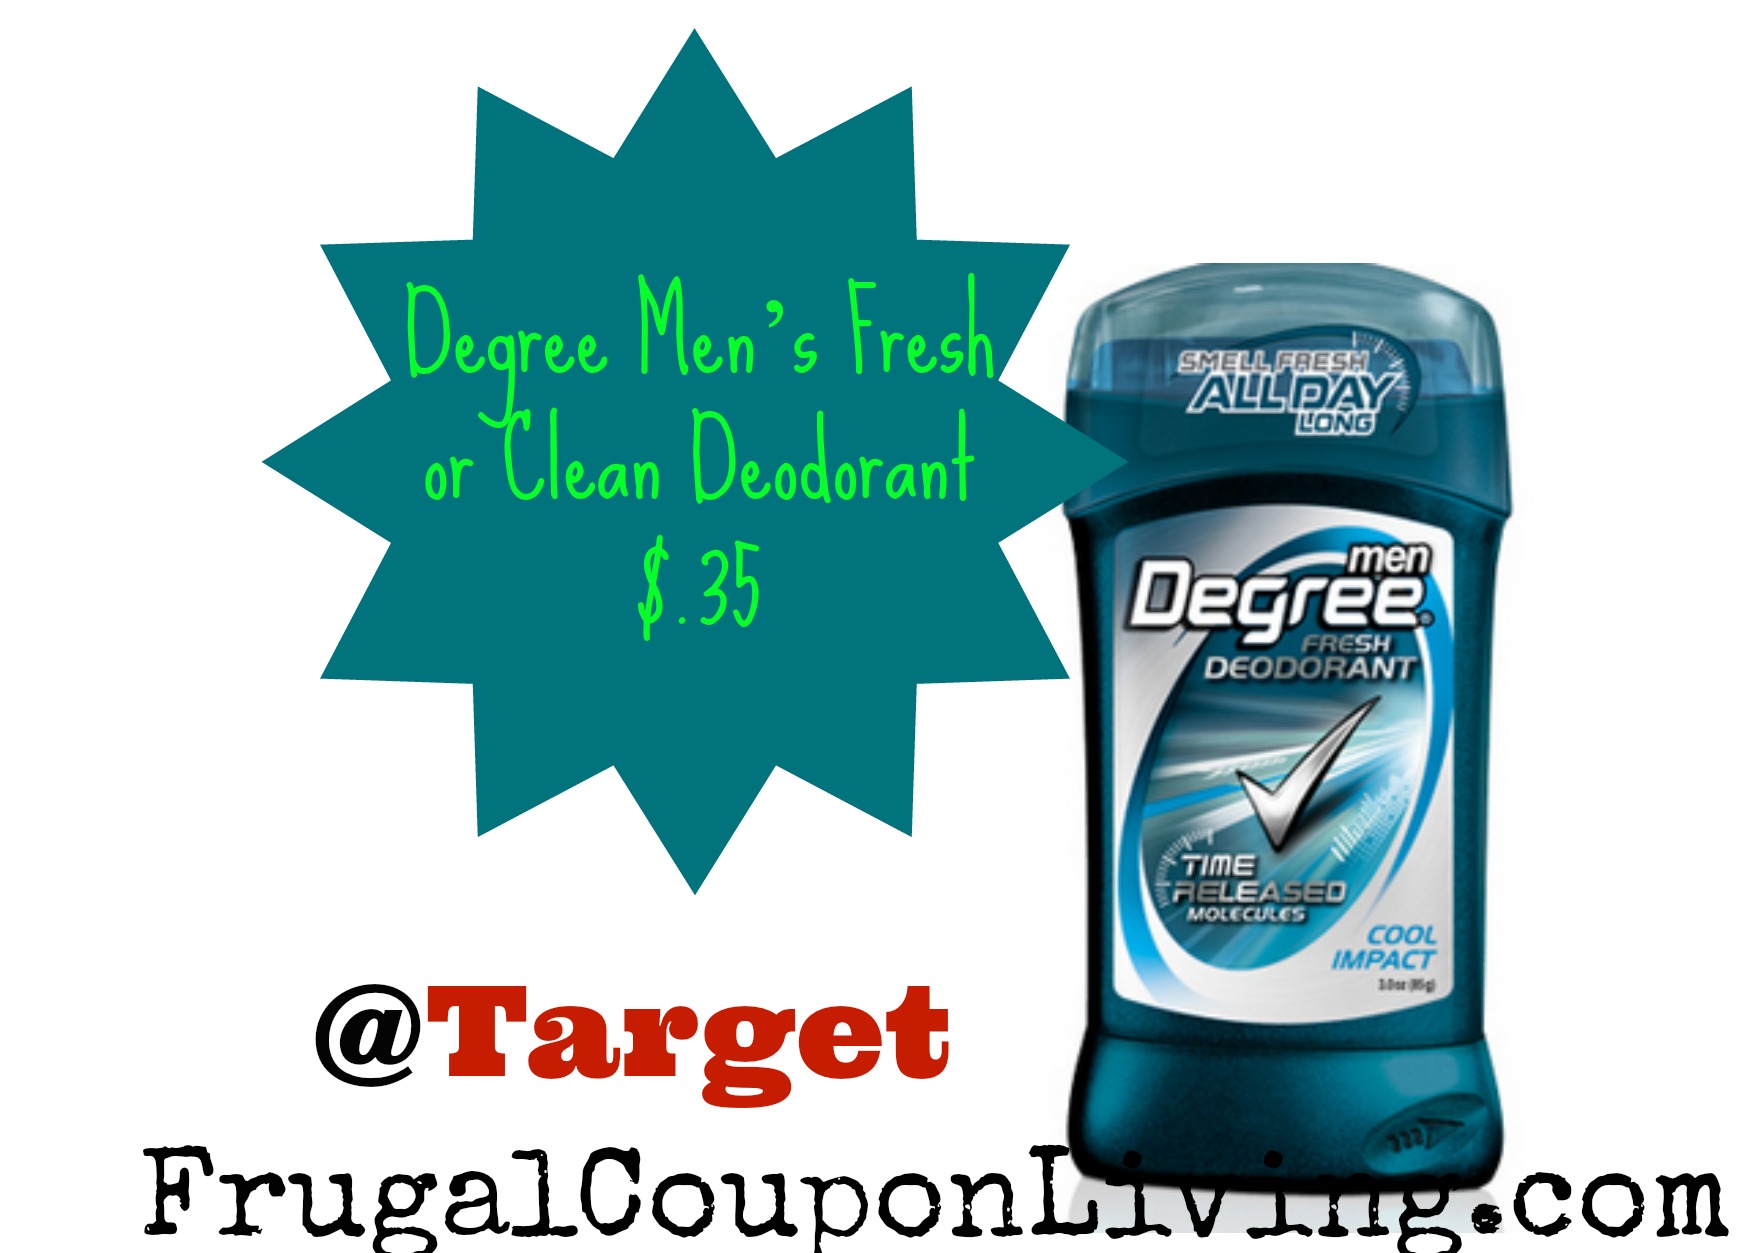 Degree Men Coupons + Deal NOW .35